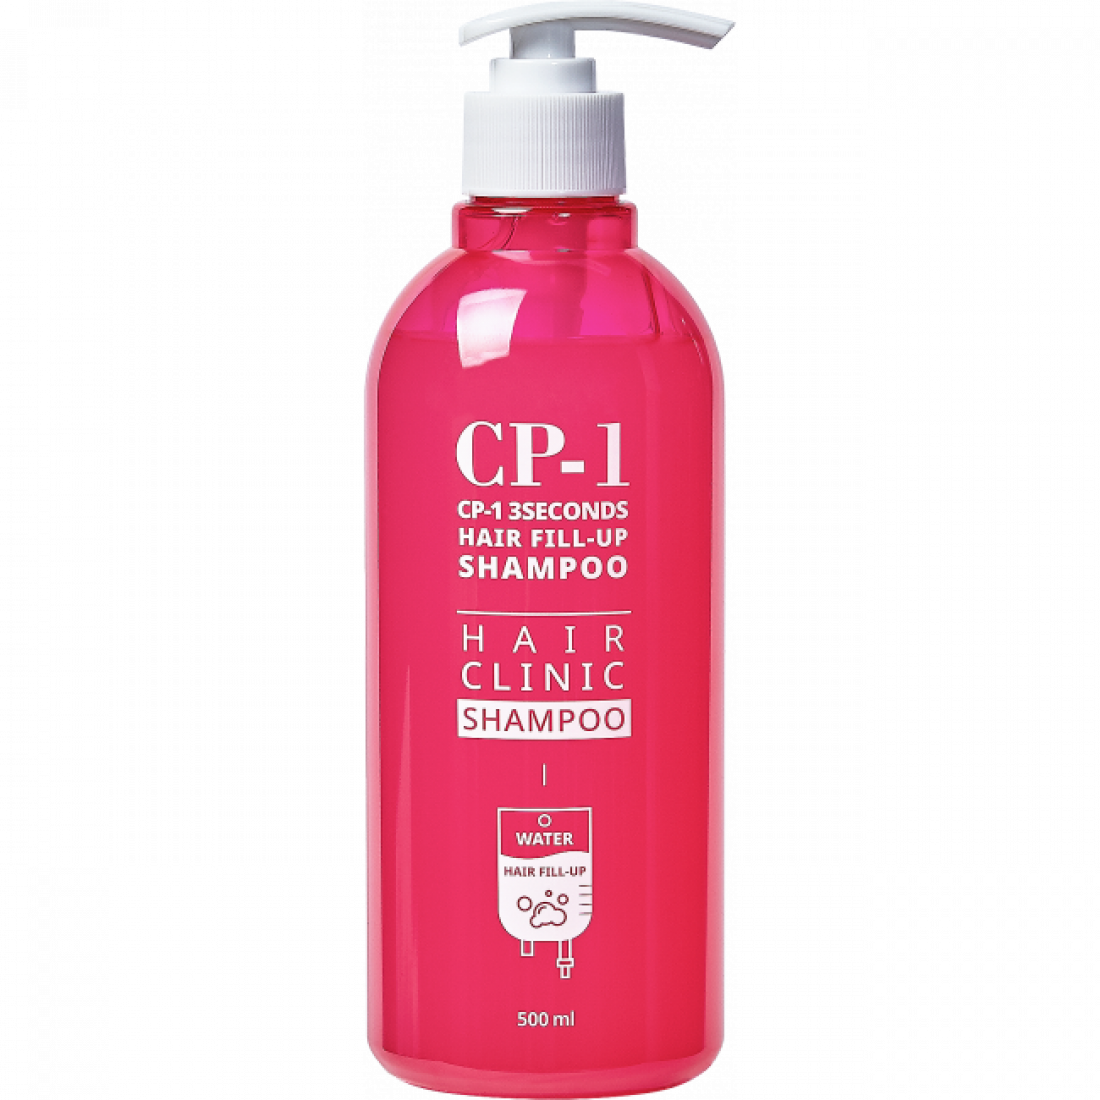 Esthetic House CP-1 3Seconds Fill-Up Shampoo 50012524